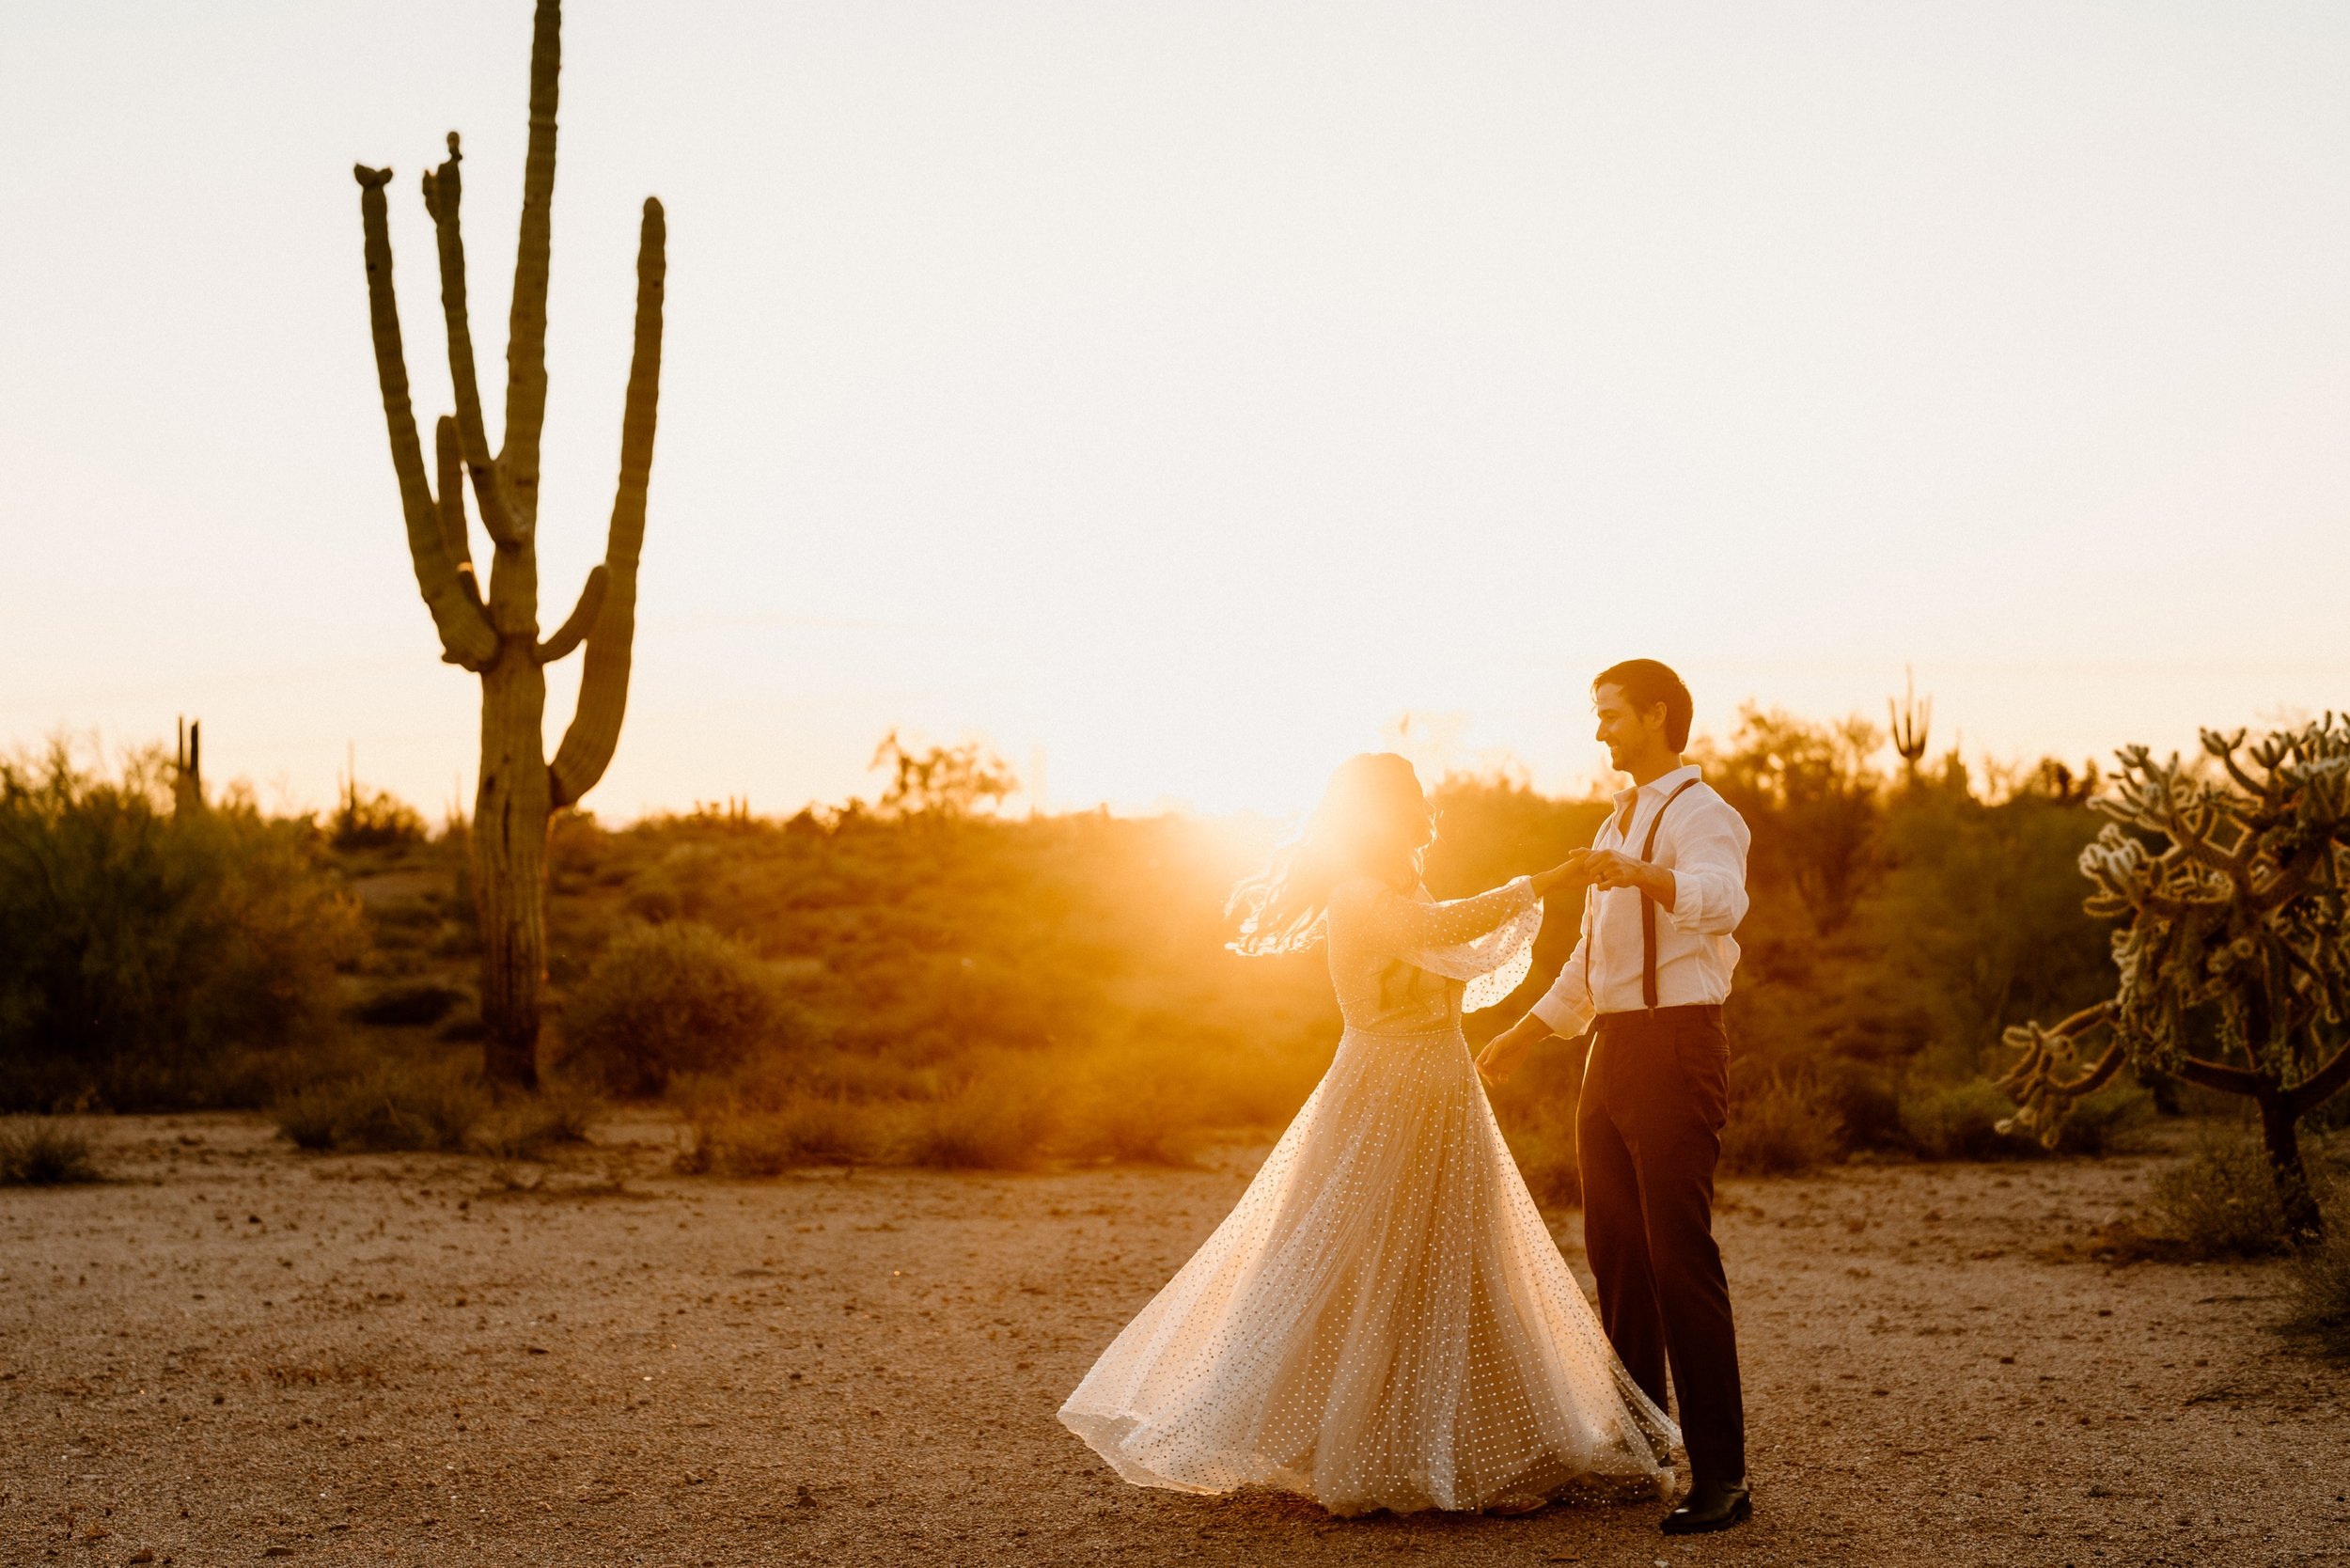 038_Wedding at The Paseo venue in Apache Junction, Arizona only 45 minutes from Phoenix..jpg